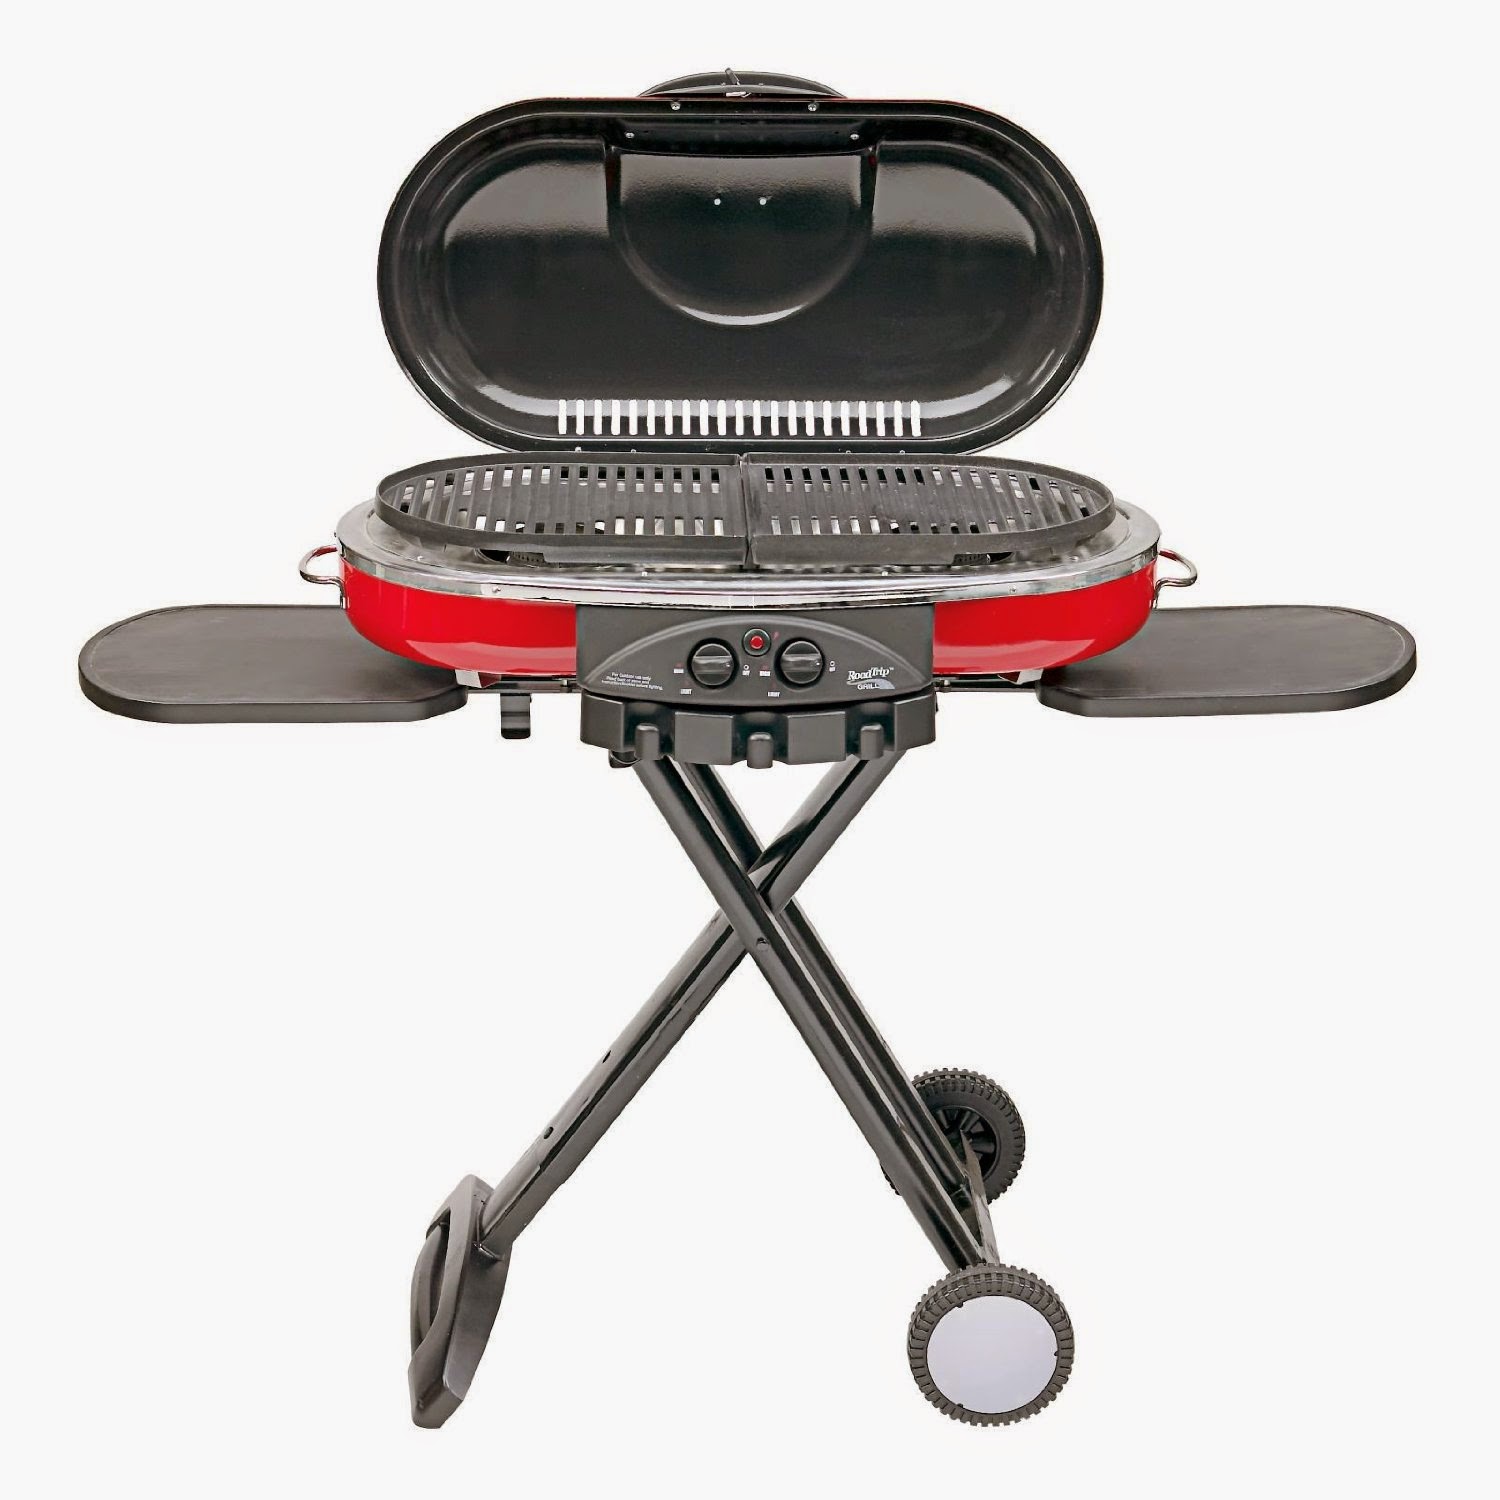 Coleman 9949-750 Road Trip LXE Propane Grill, 2 fully adjustable powerful burners, 2 porcelain coated cast iron warp resistant grates, removable grease tray, mix and match options of cooking surfaces